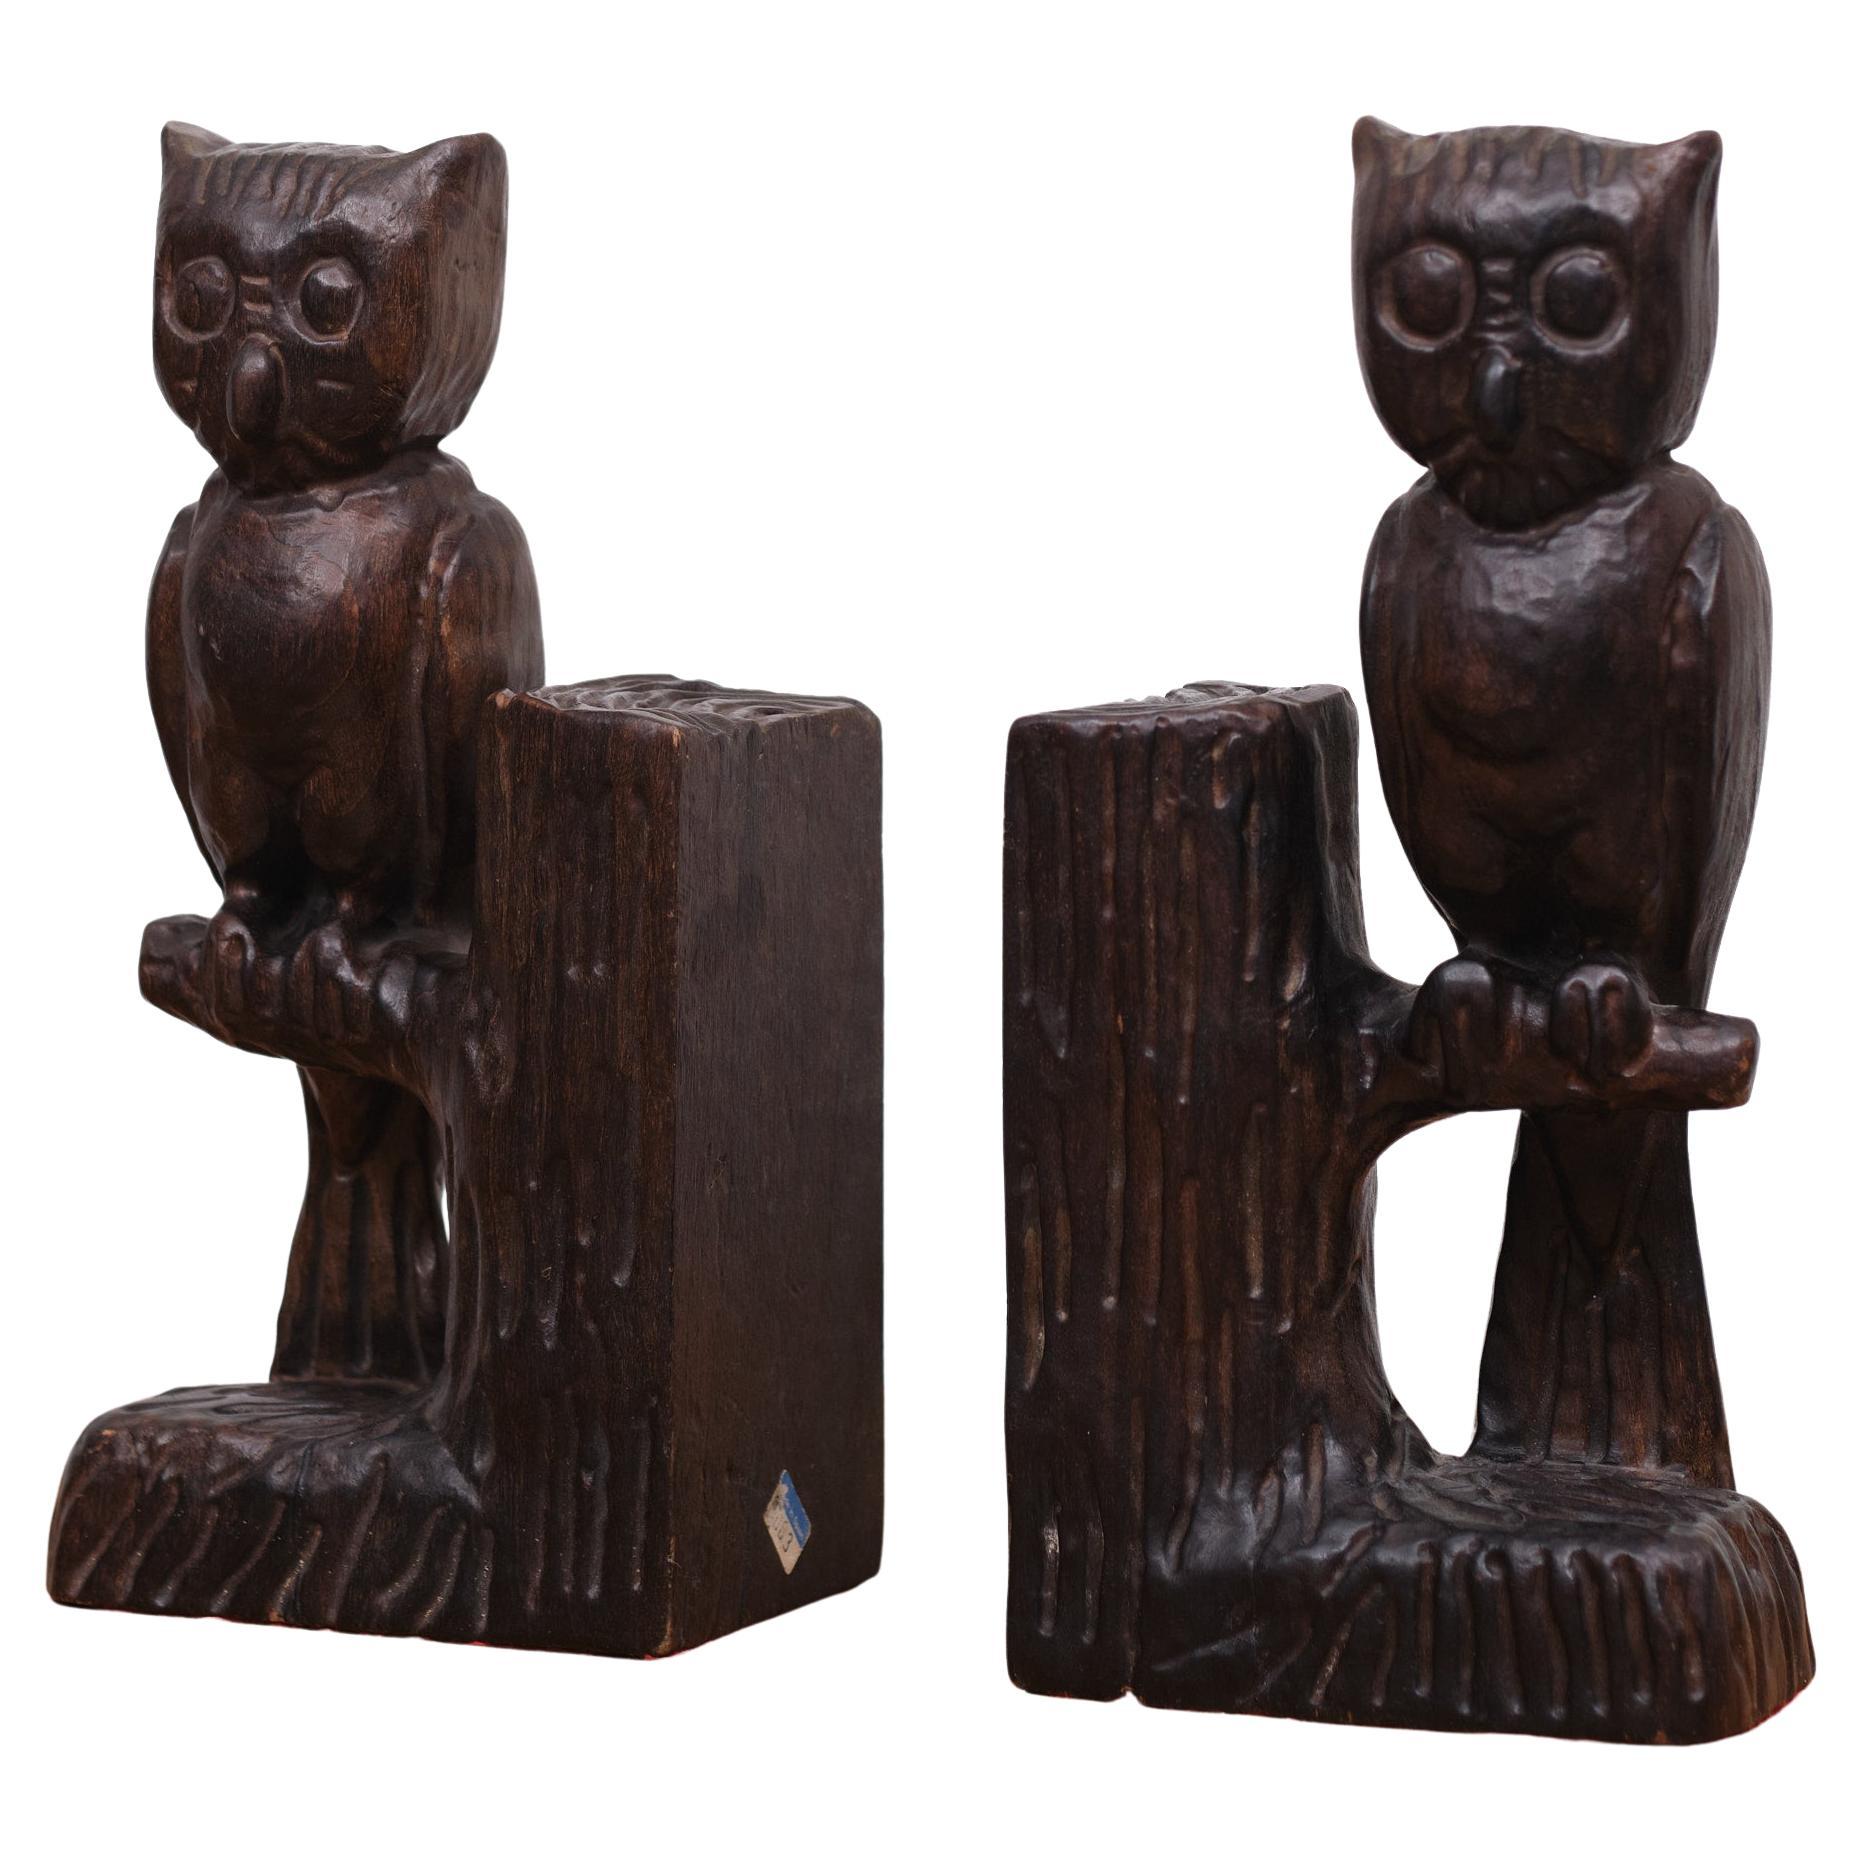 Very nice hand carved wooden owls. 1960s Spain.